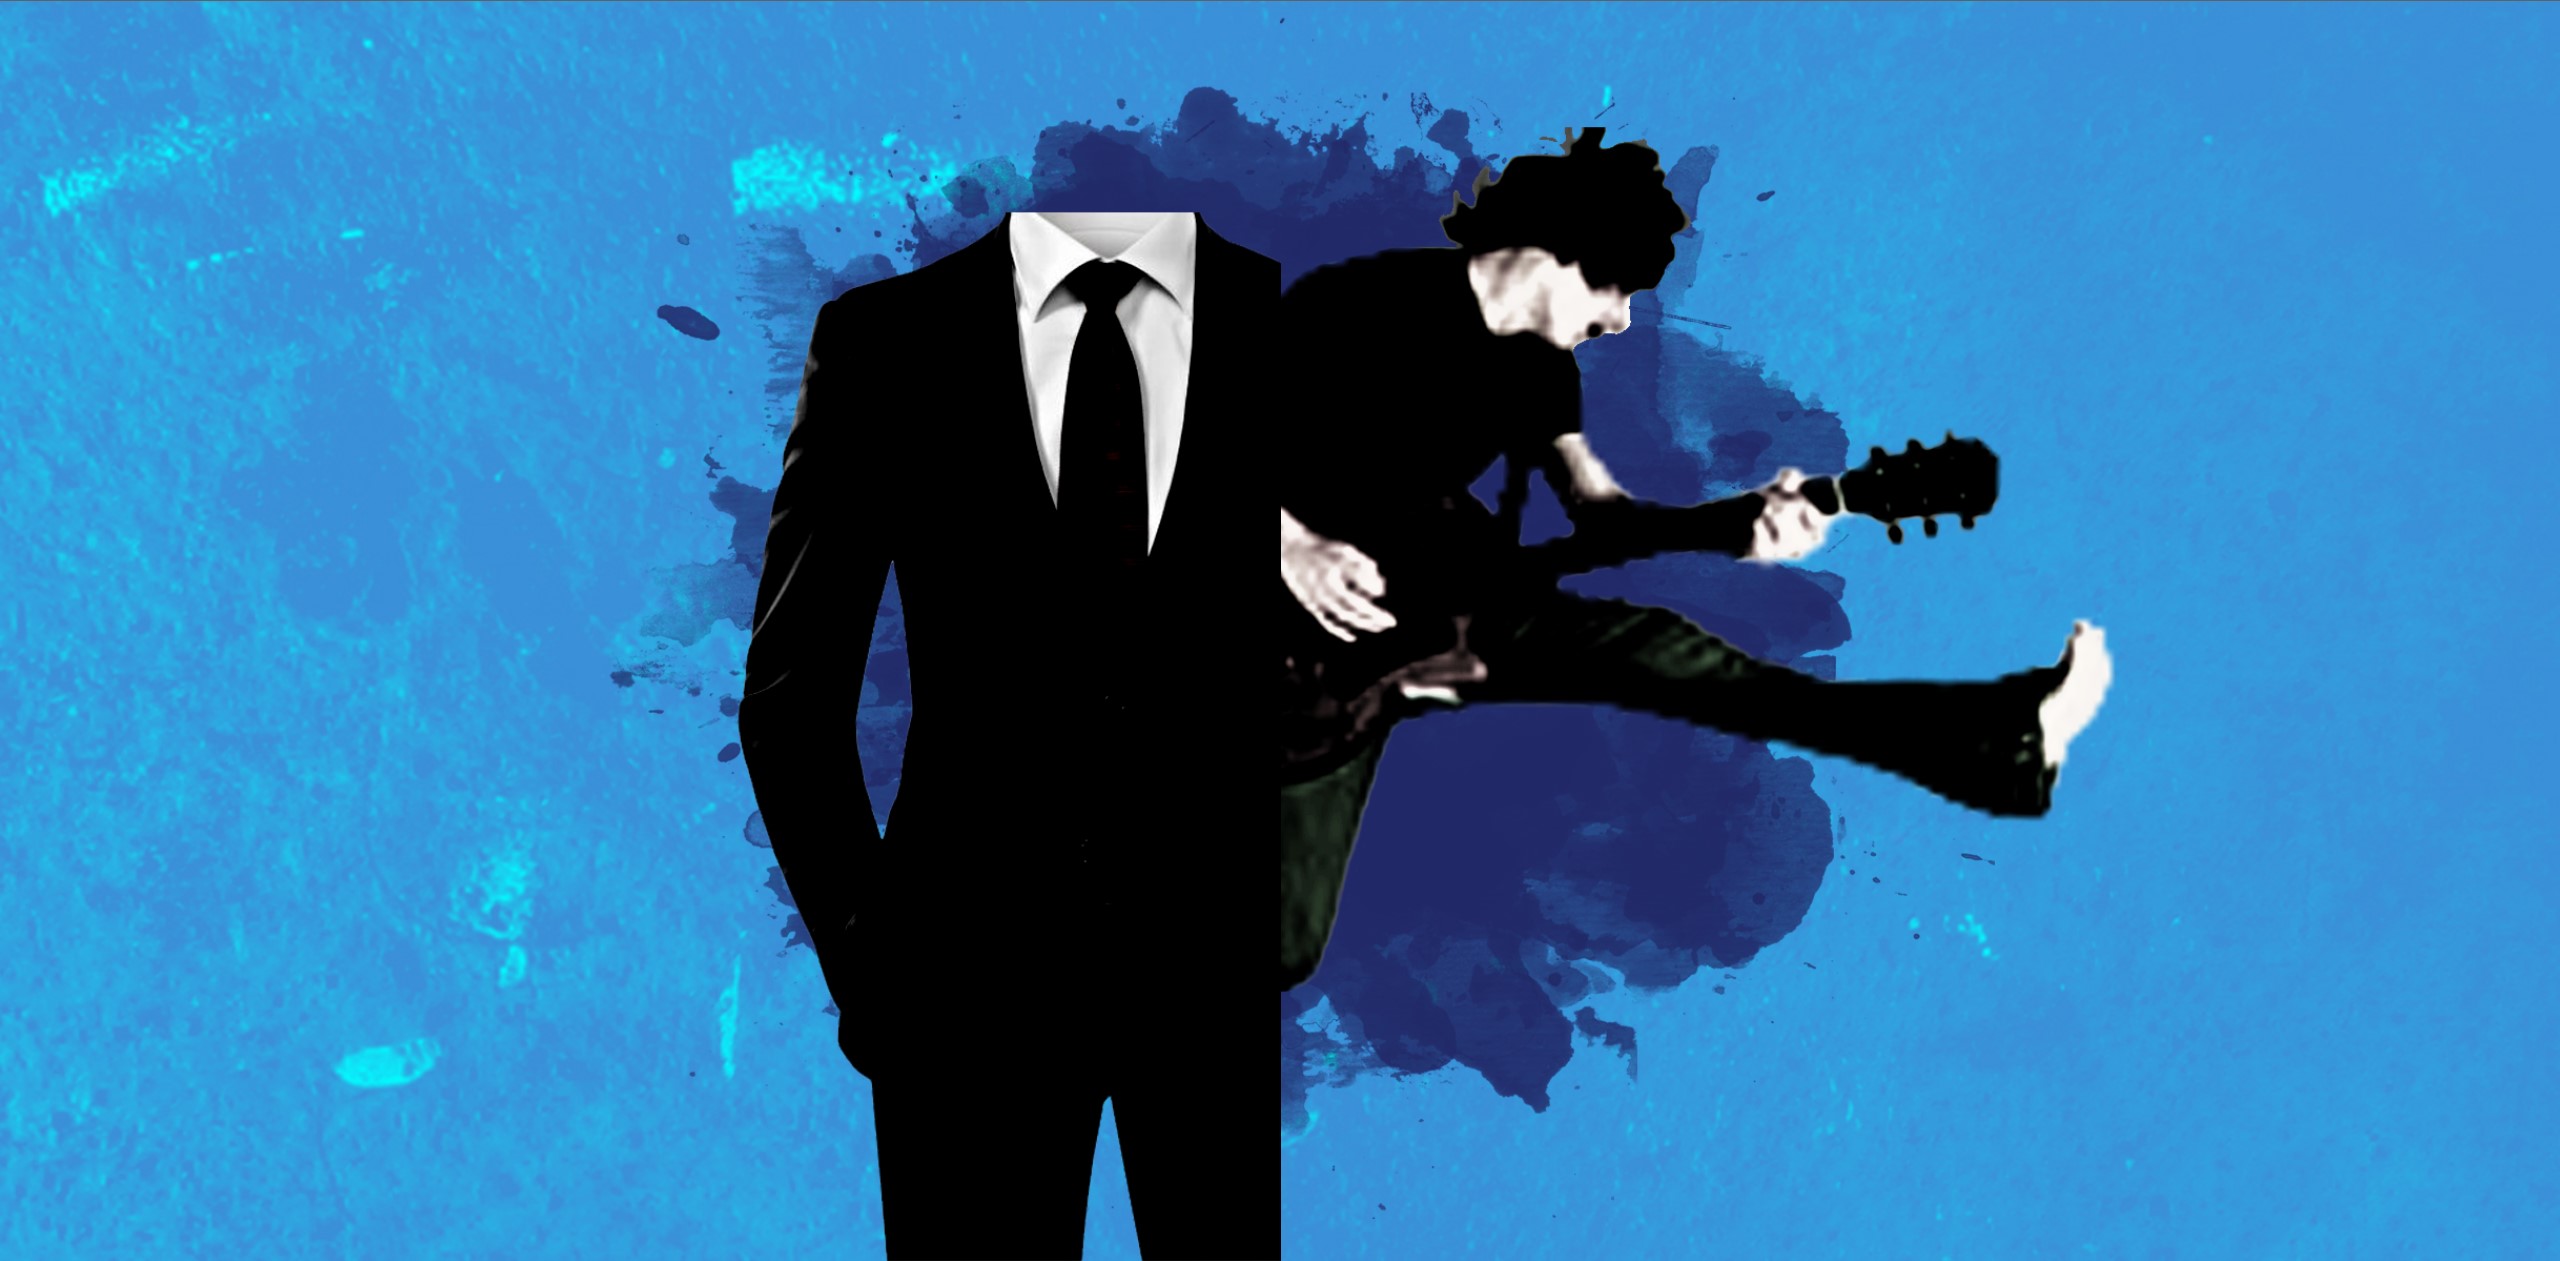 colorful splash page with business suit and guitarist